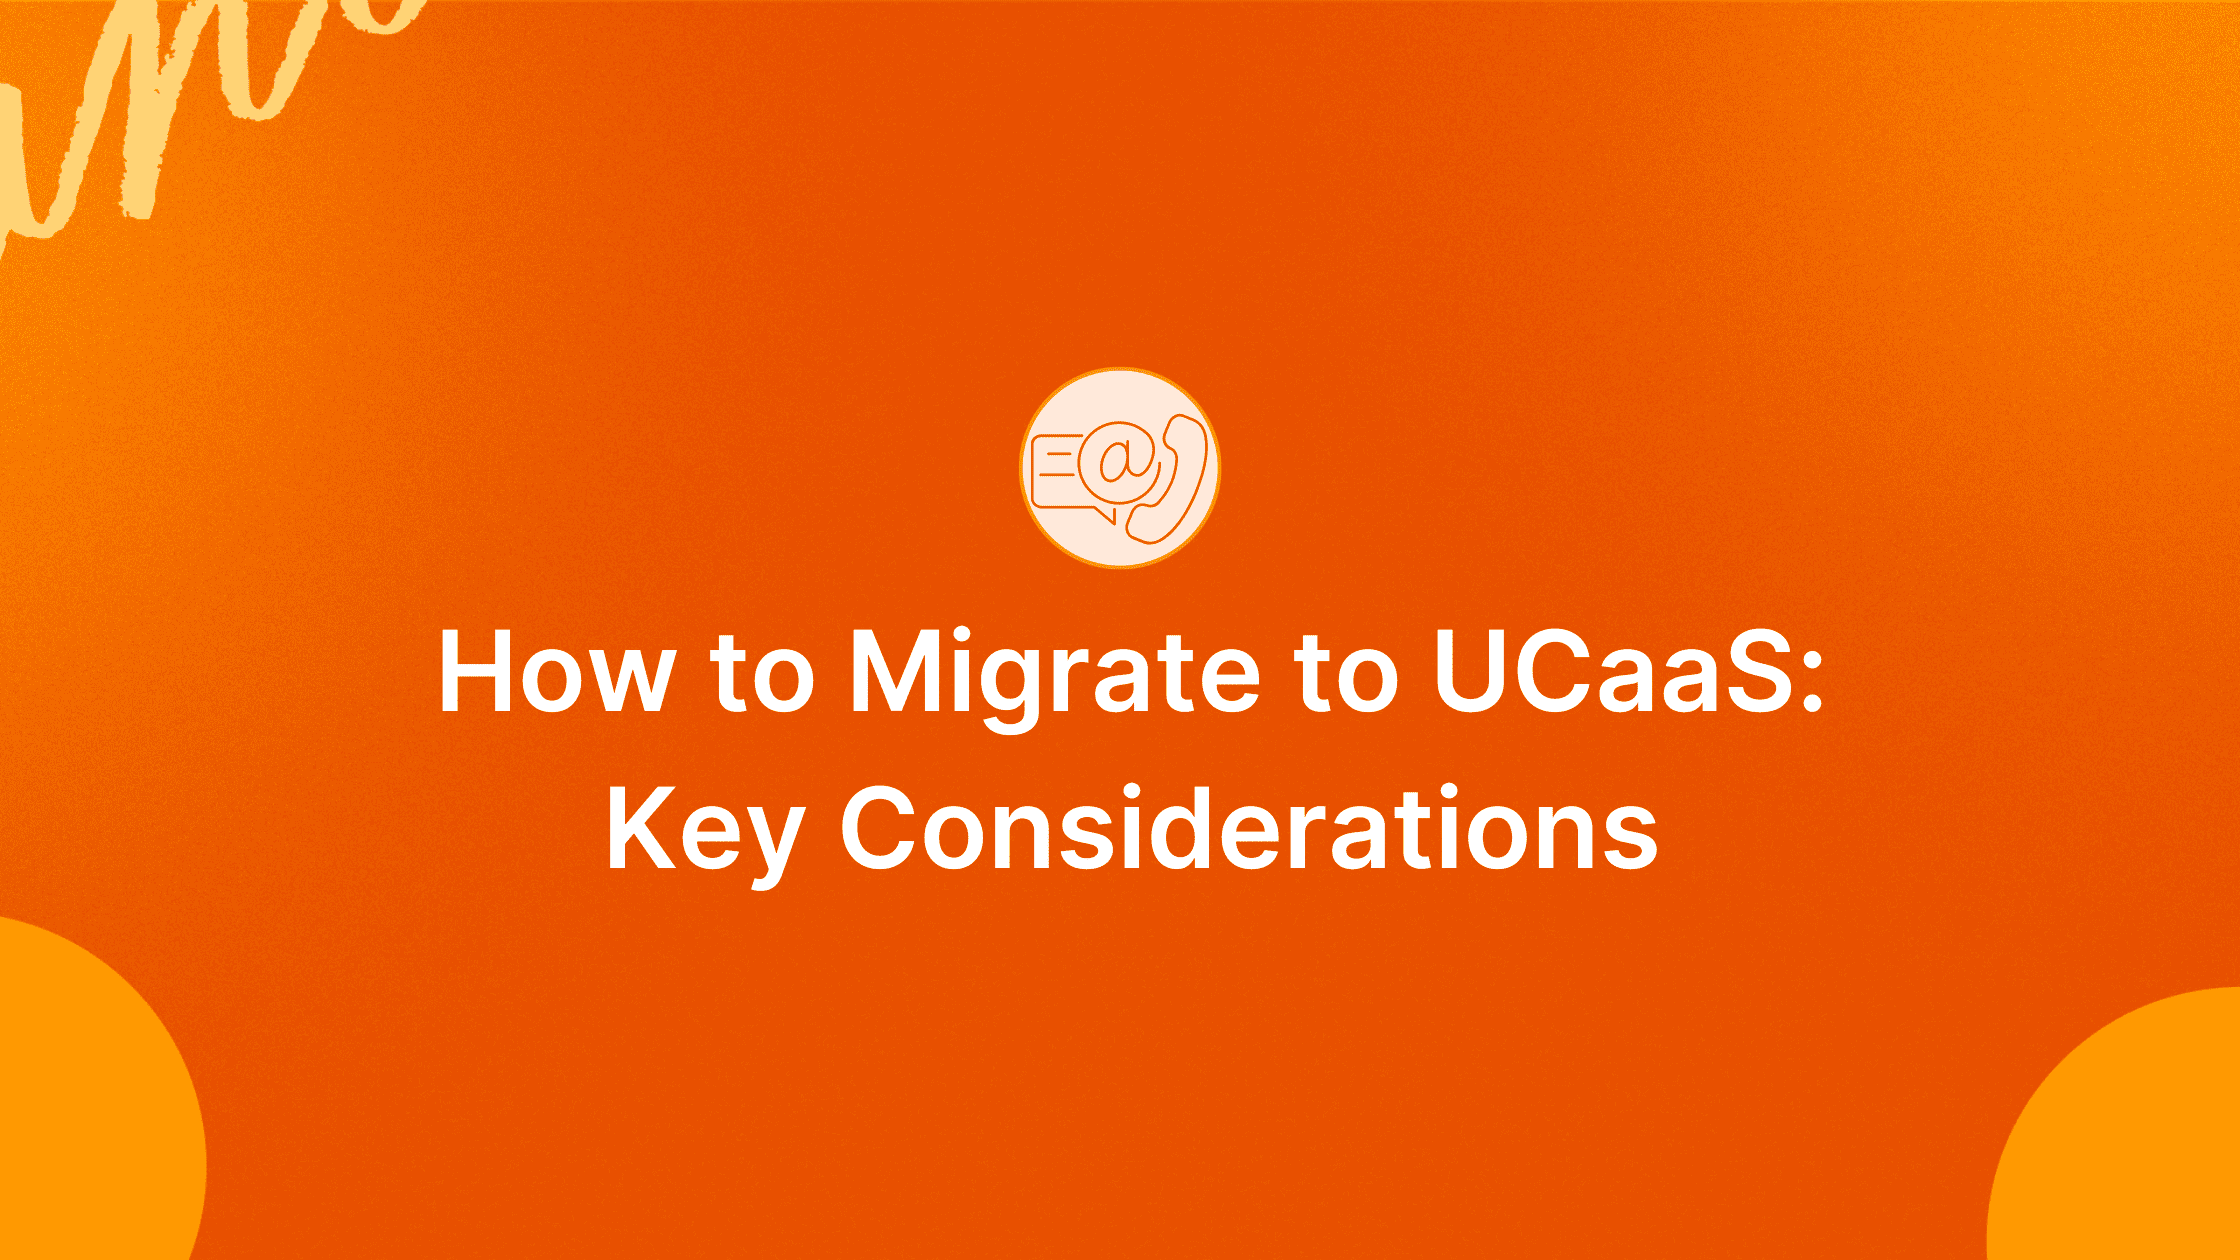 How to Migrate to UCaaS (The Right Way)?